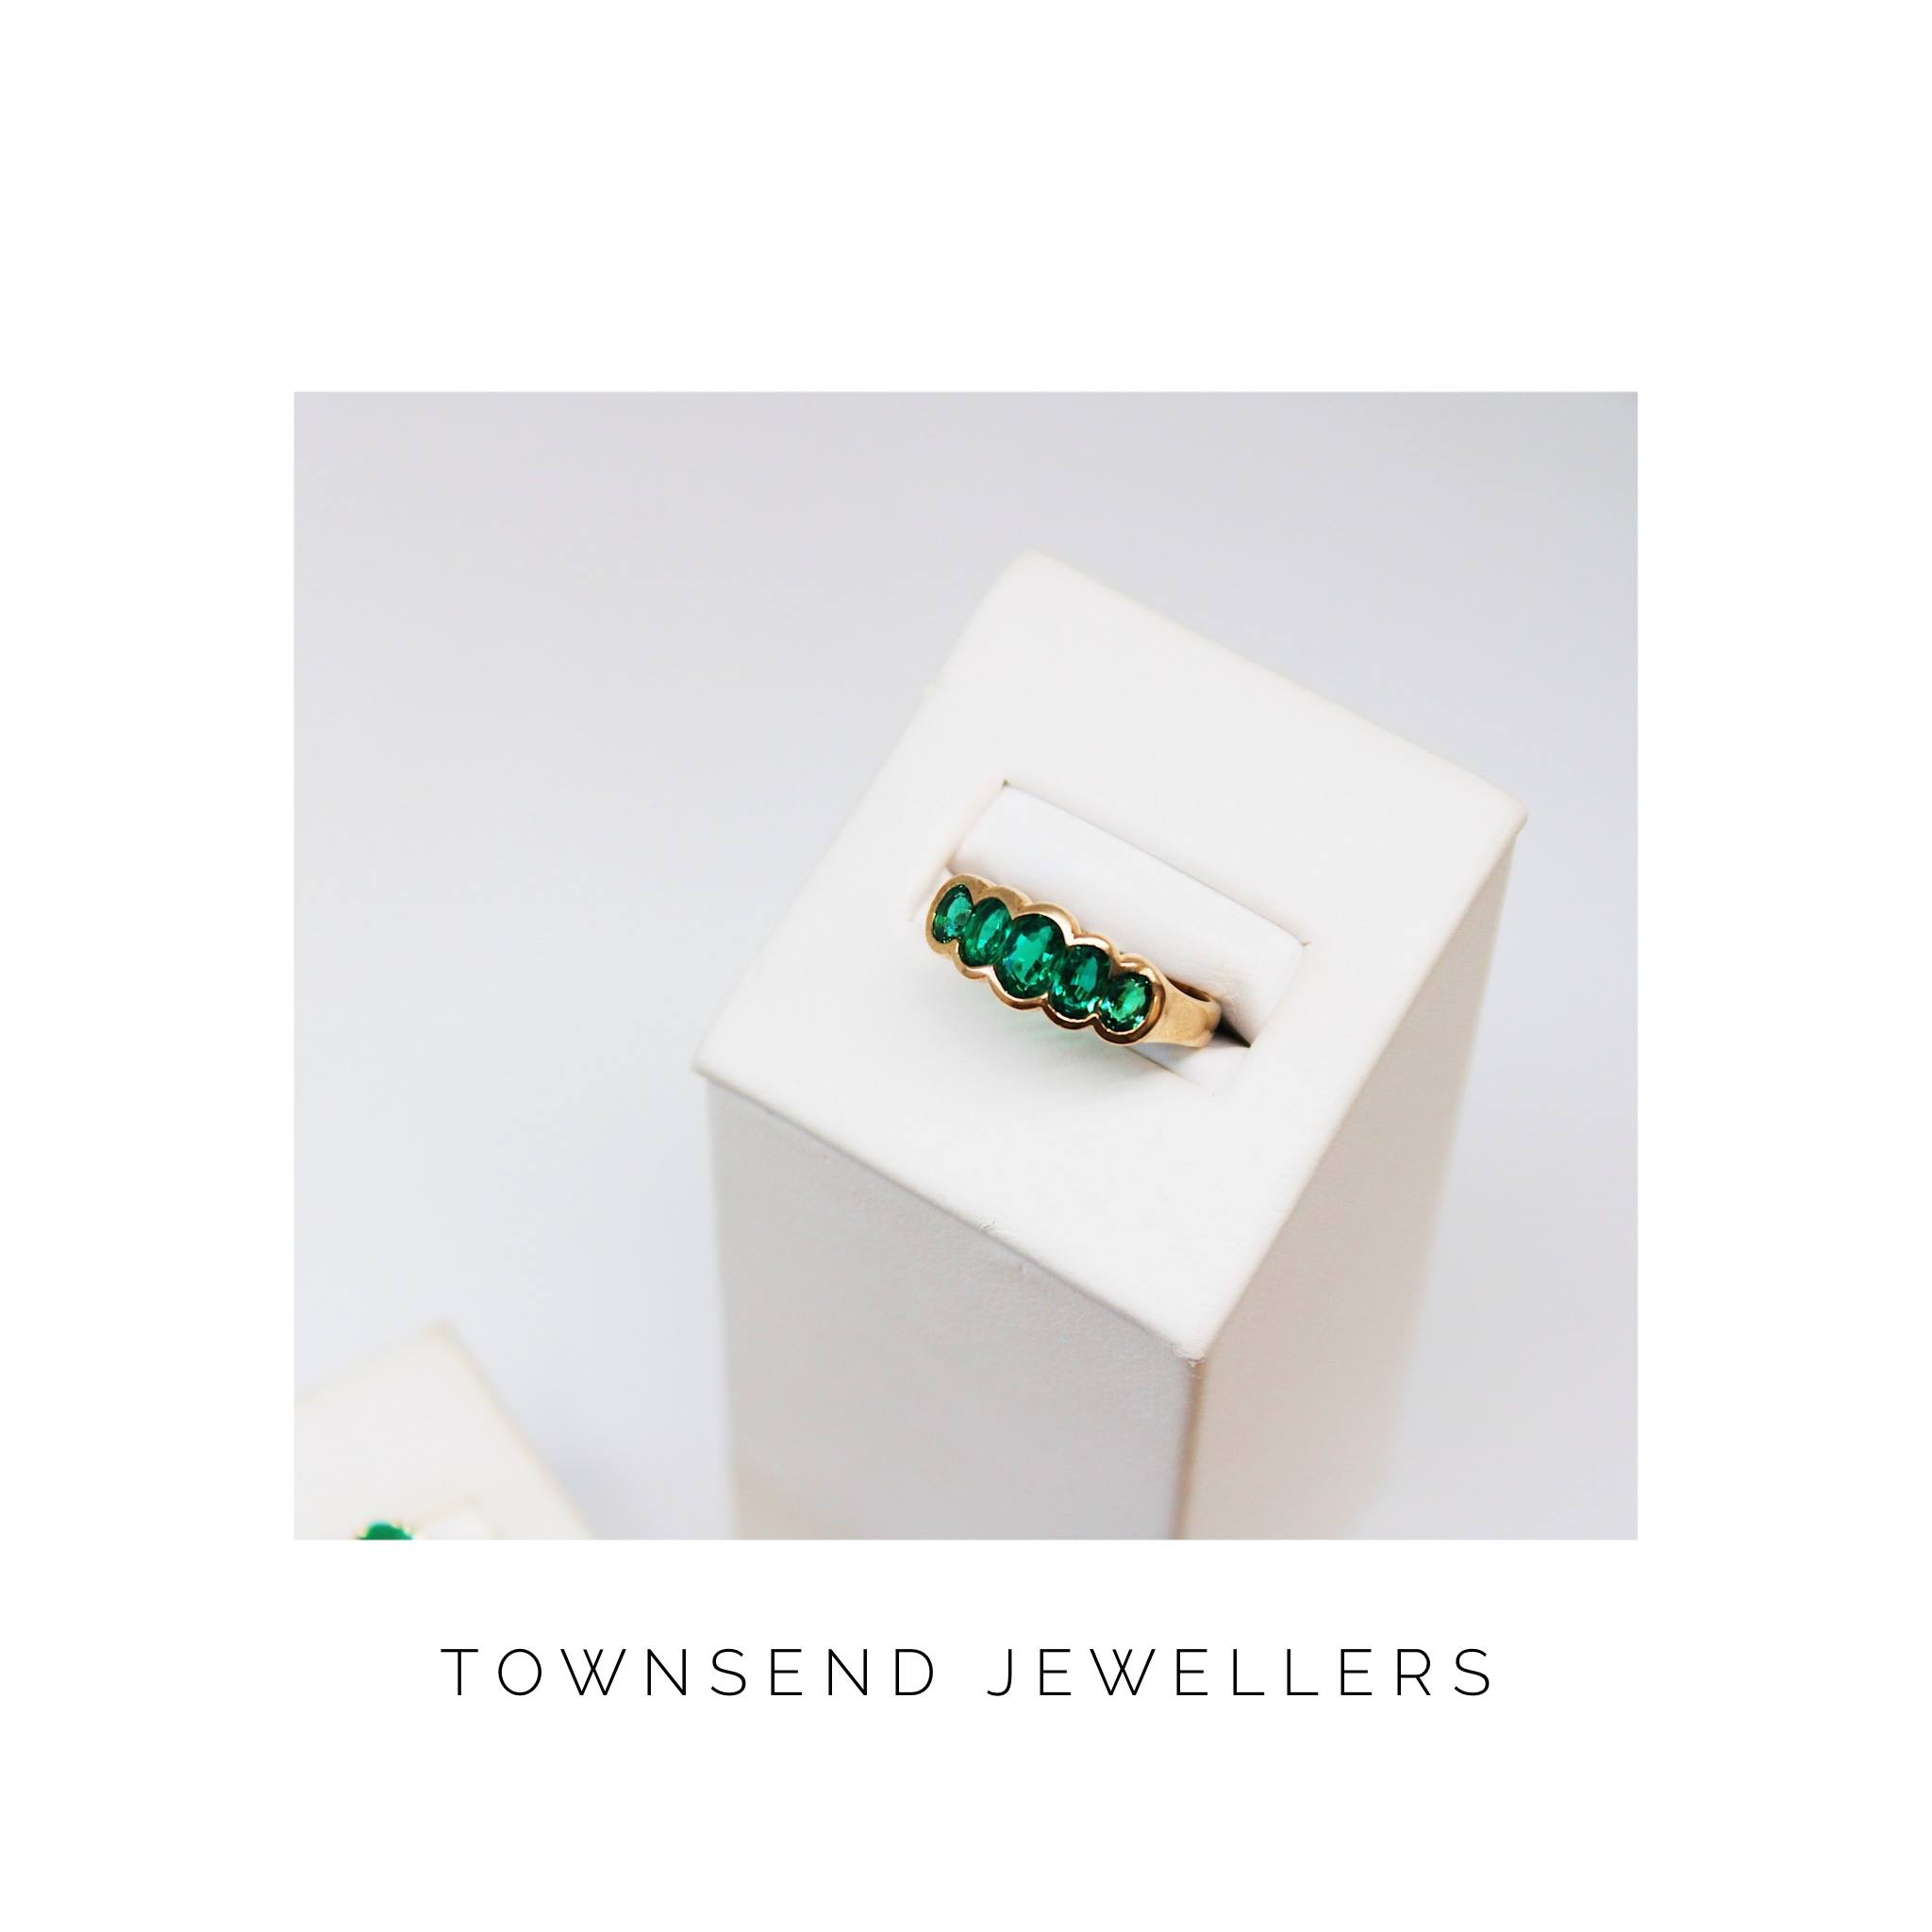 Townsend Jewellers